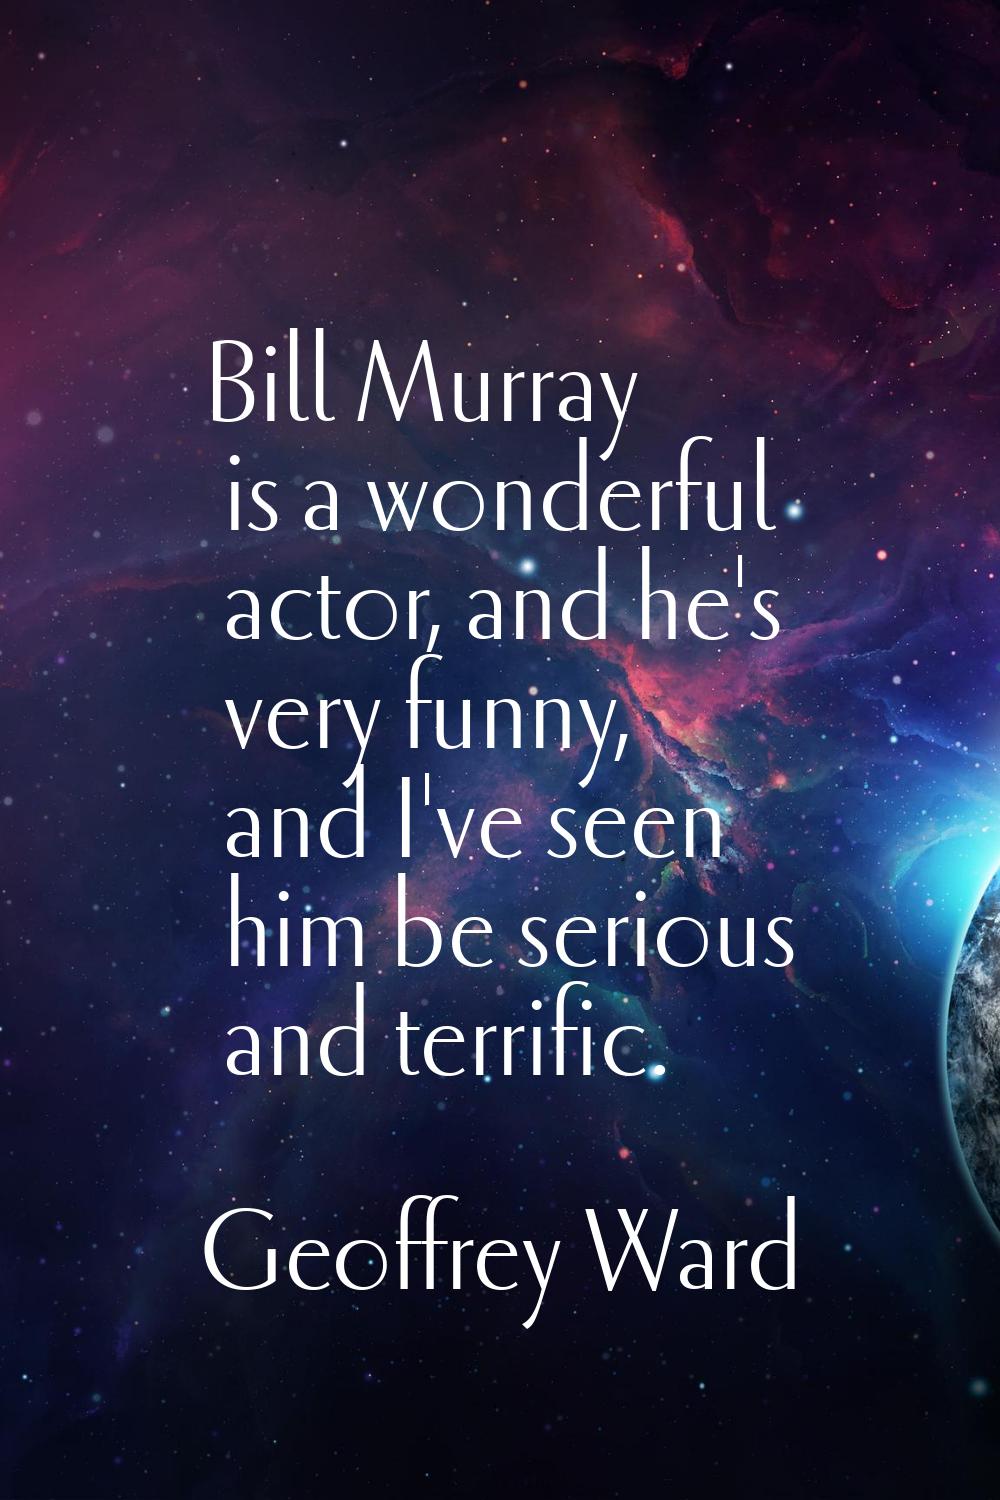 Bill Murray is a wonderful actor, and he's very funny, and I've seen him be serious and terrific.